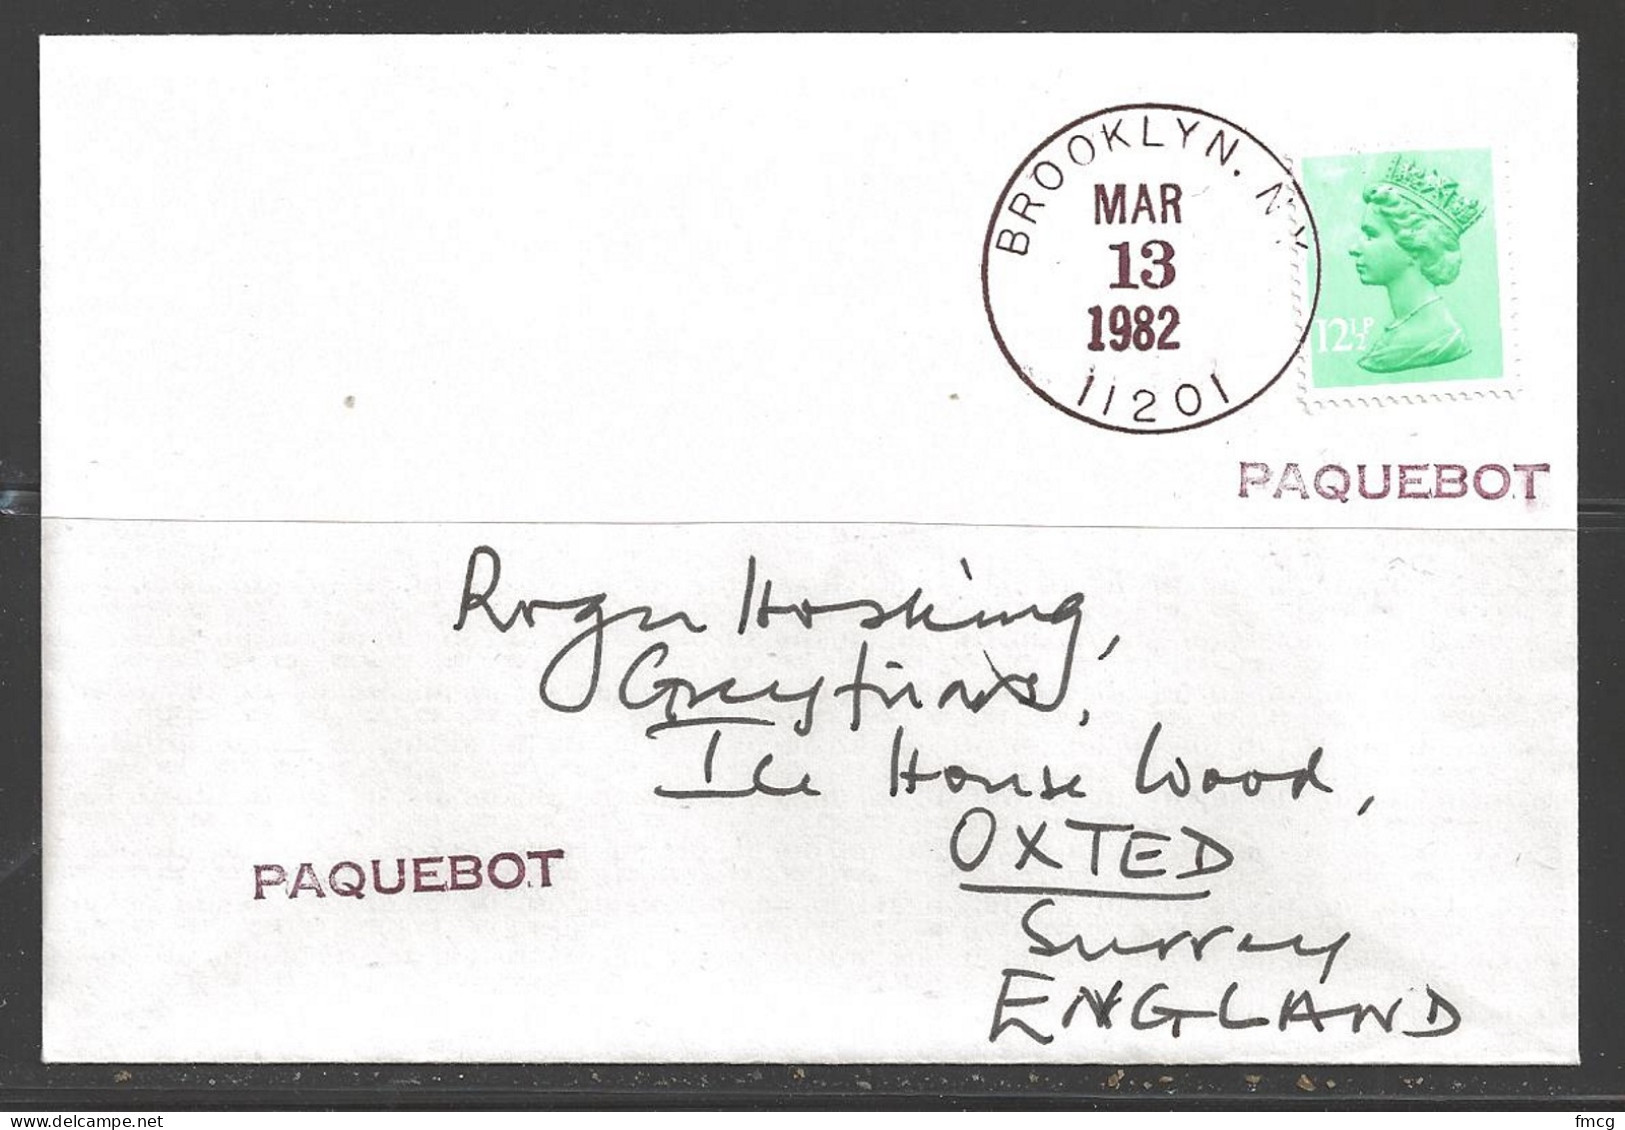 1982 Paquebot Cover, British Stamp Used In Brooklyn New York (Mar 13) - Covers & Documents